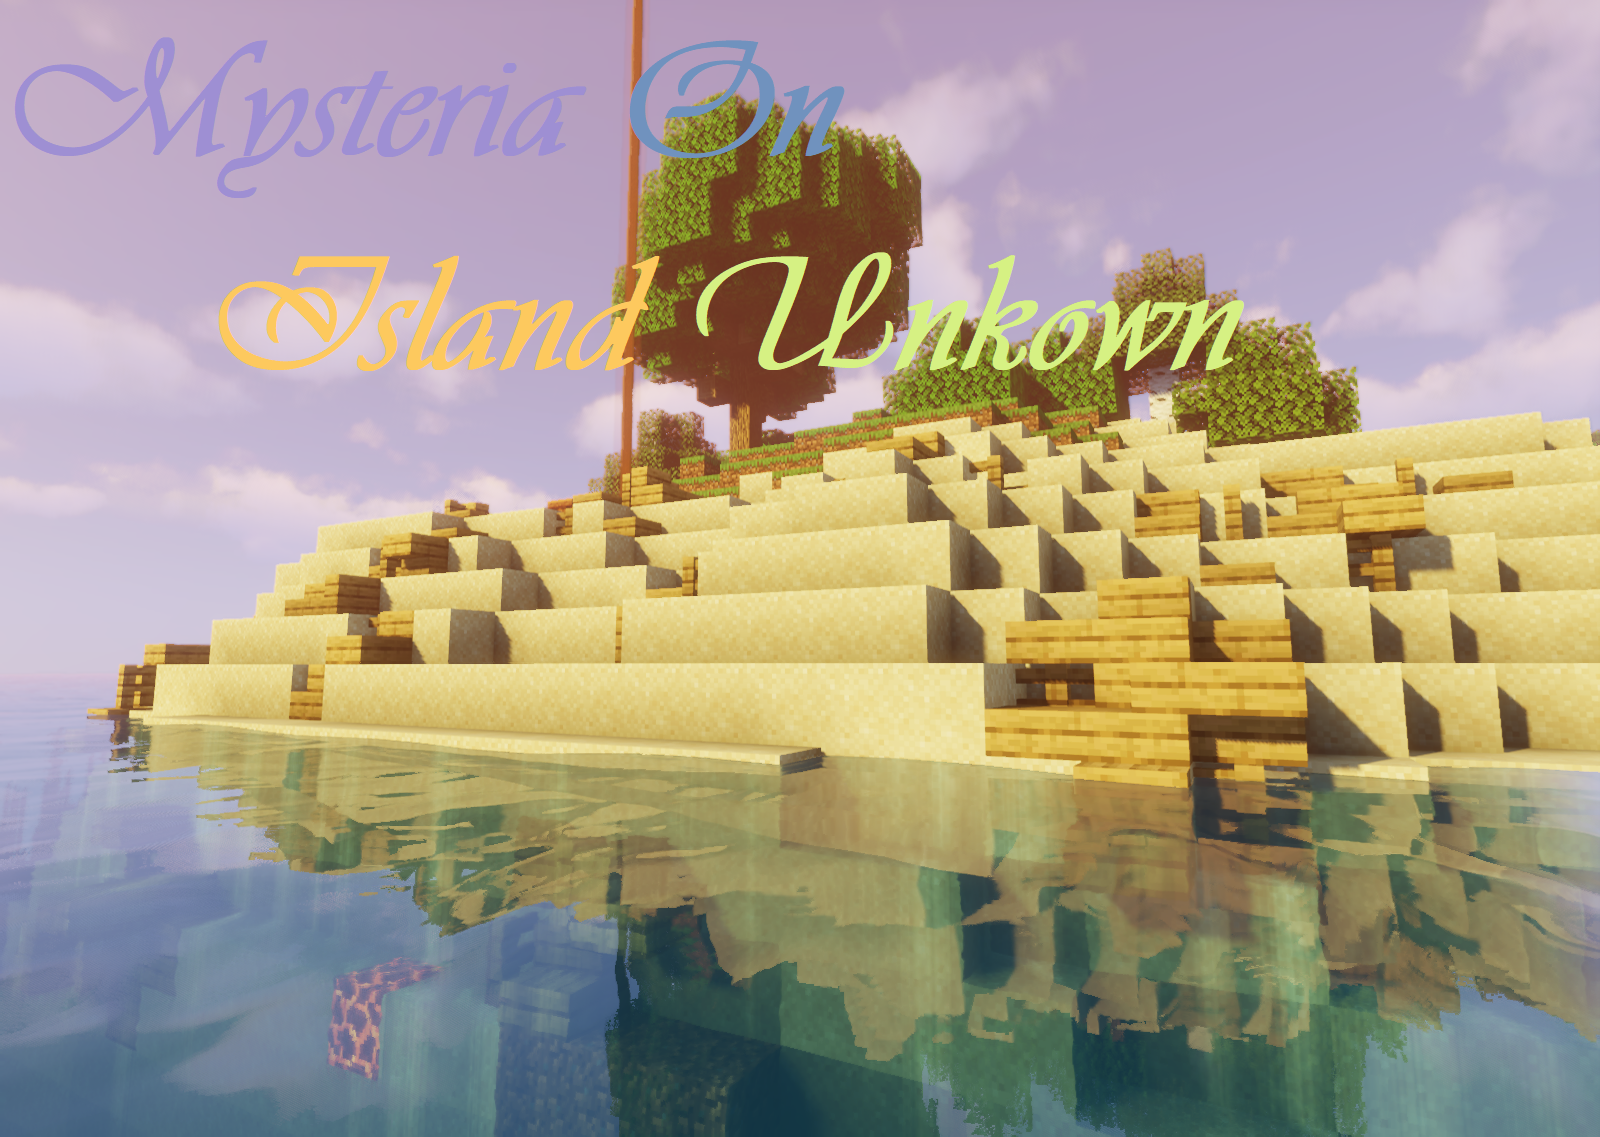 Download Mysteria on Island Unkown for Minecraft 1.15.2